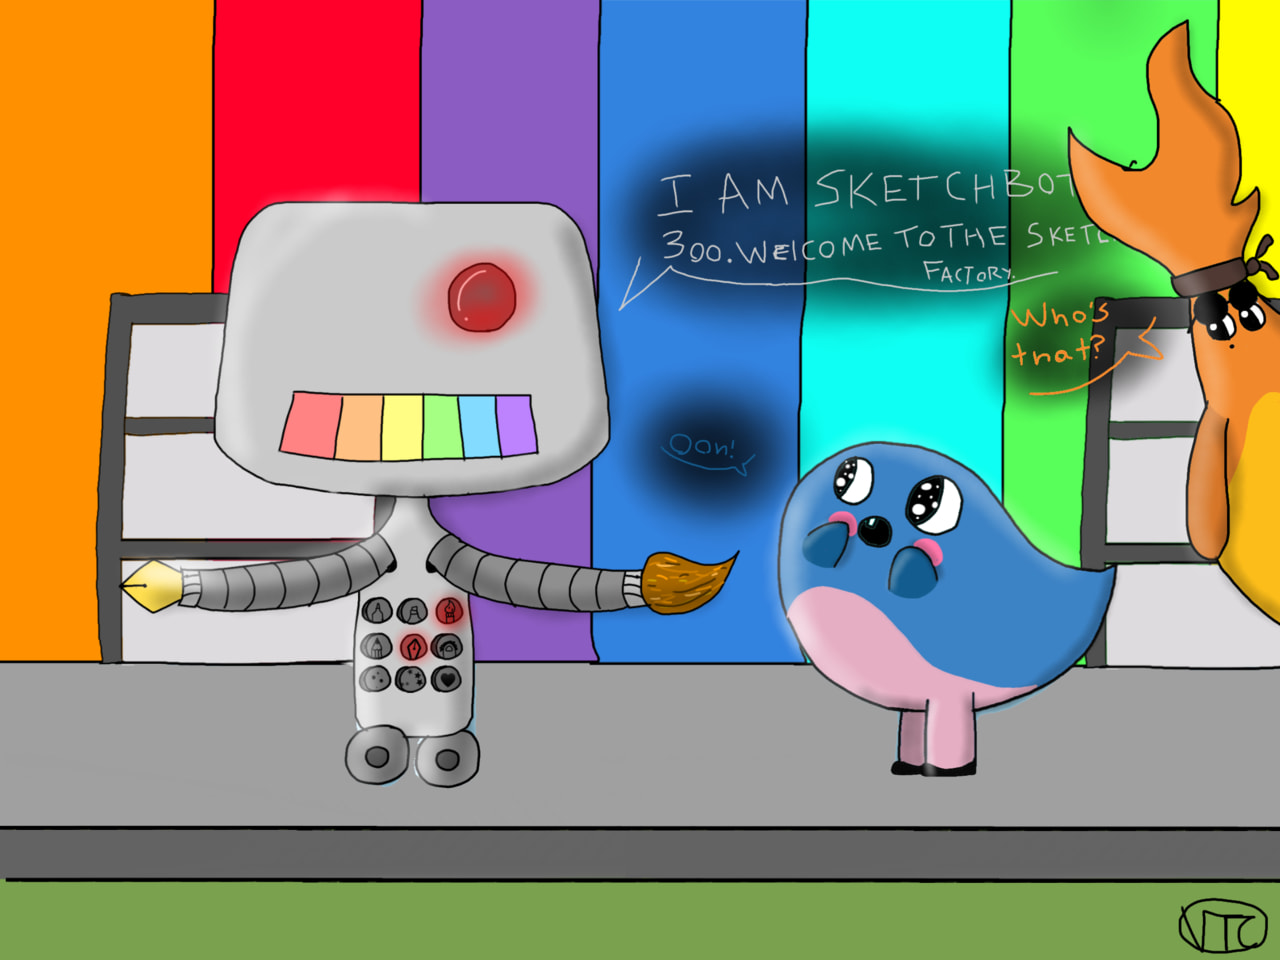 When #otto and #axel return back to the sketch factory, a robot awaits them, named Sketchbot 300. A friendly robot that is there to assist the two when they need help in drawing! #myrobot #sonysketch @sonysketch 